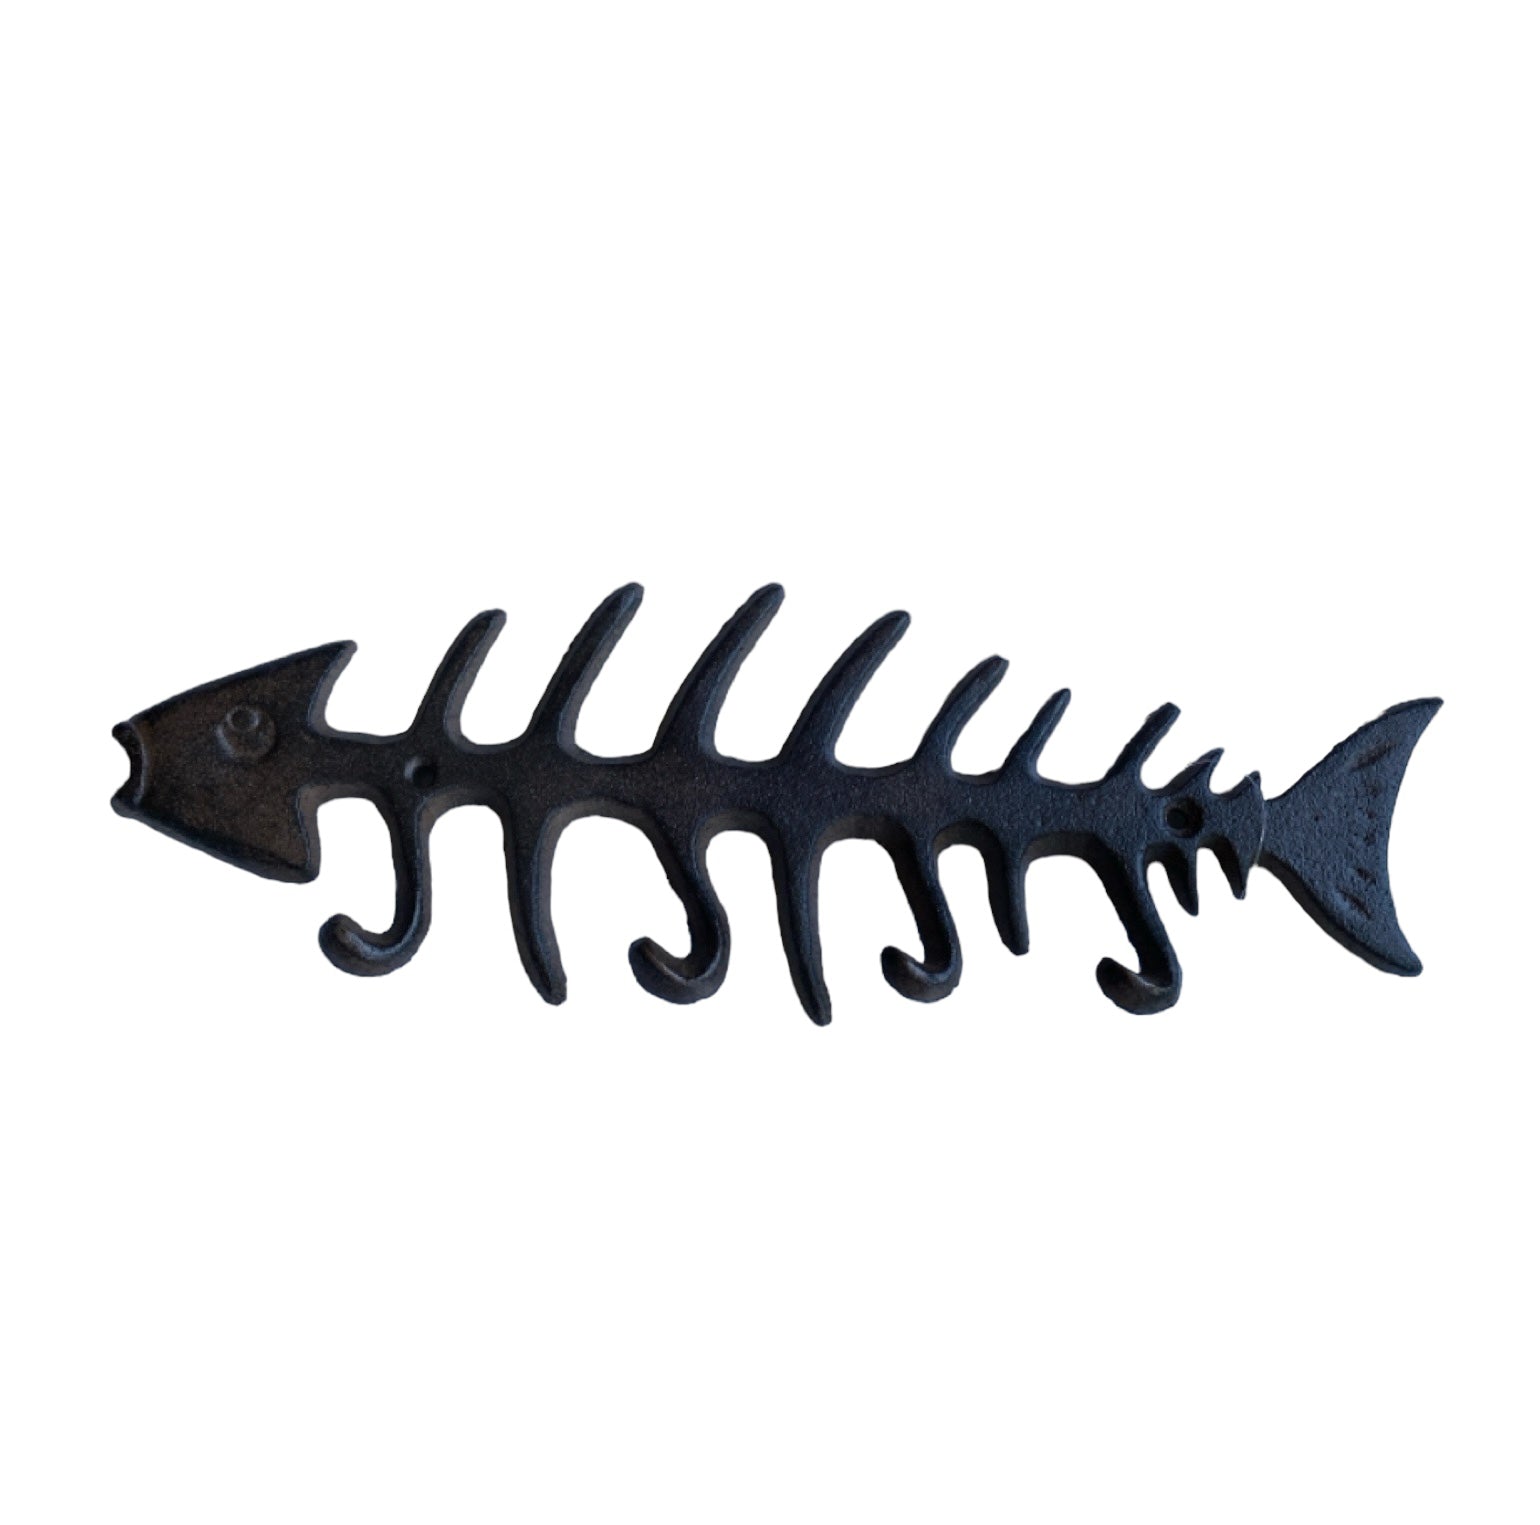 Hook Fish Bone Rustic - The Renmy Store Homewares & Gifts 